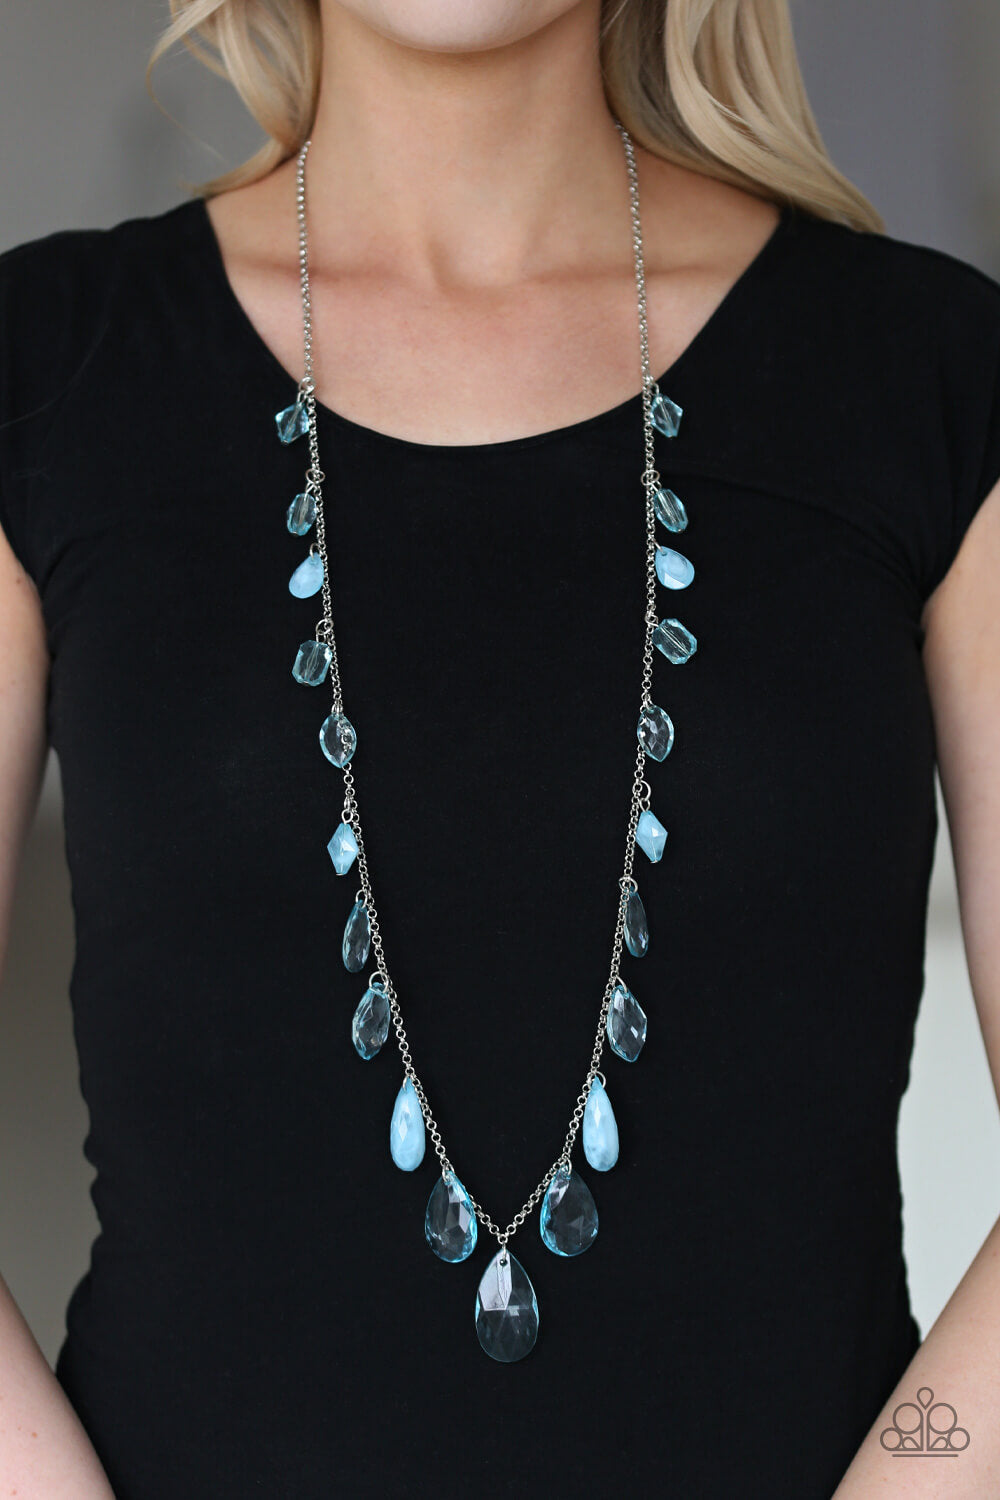 GLOW And Steady Wins The Race - Blue Necklace Set - Princess Glam Shop